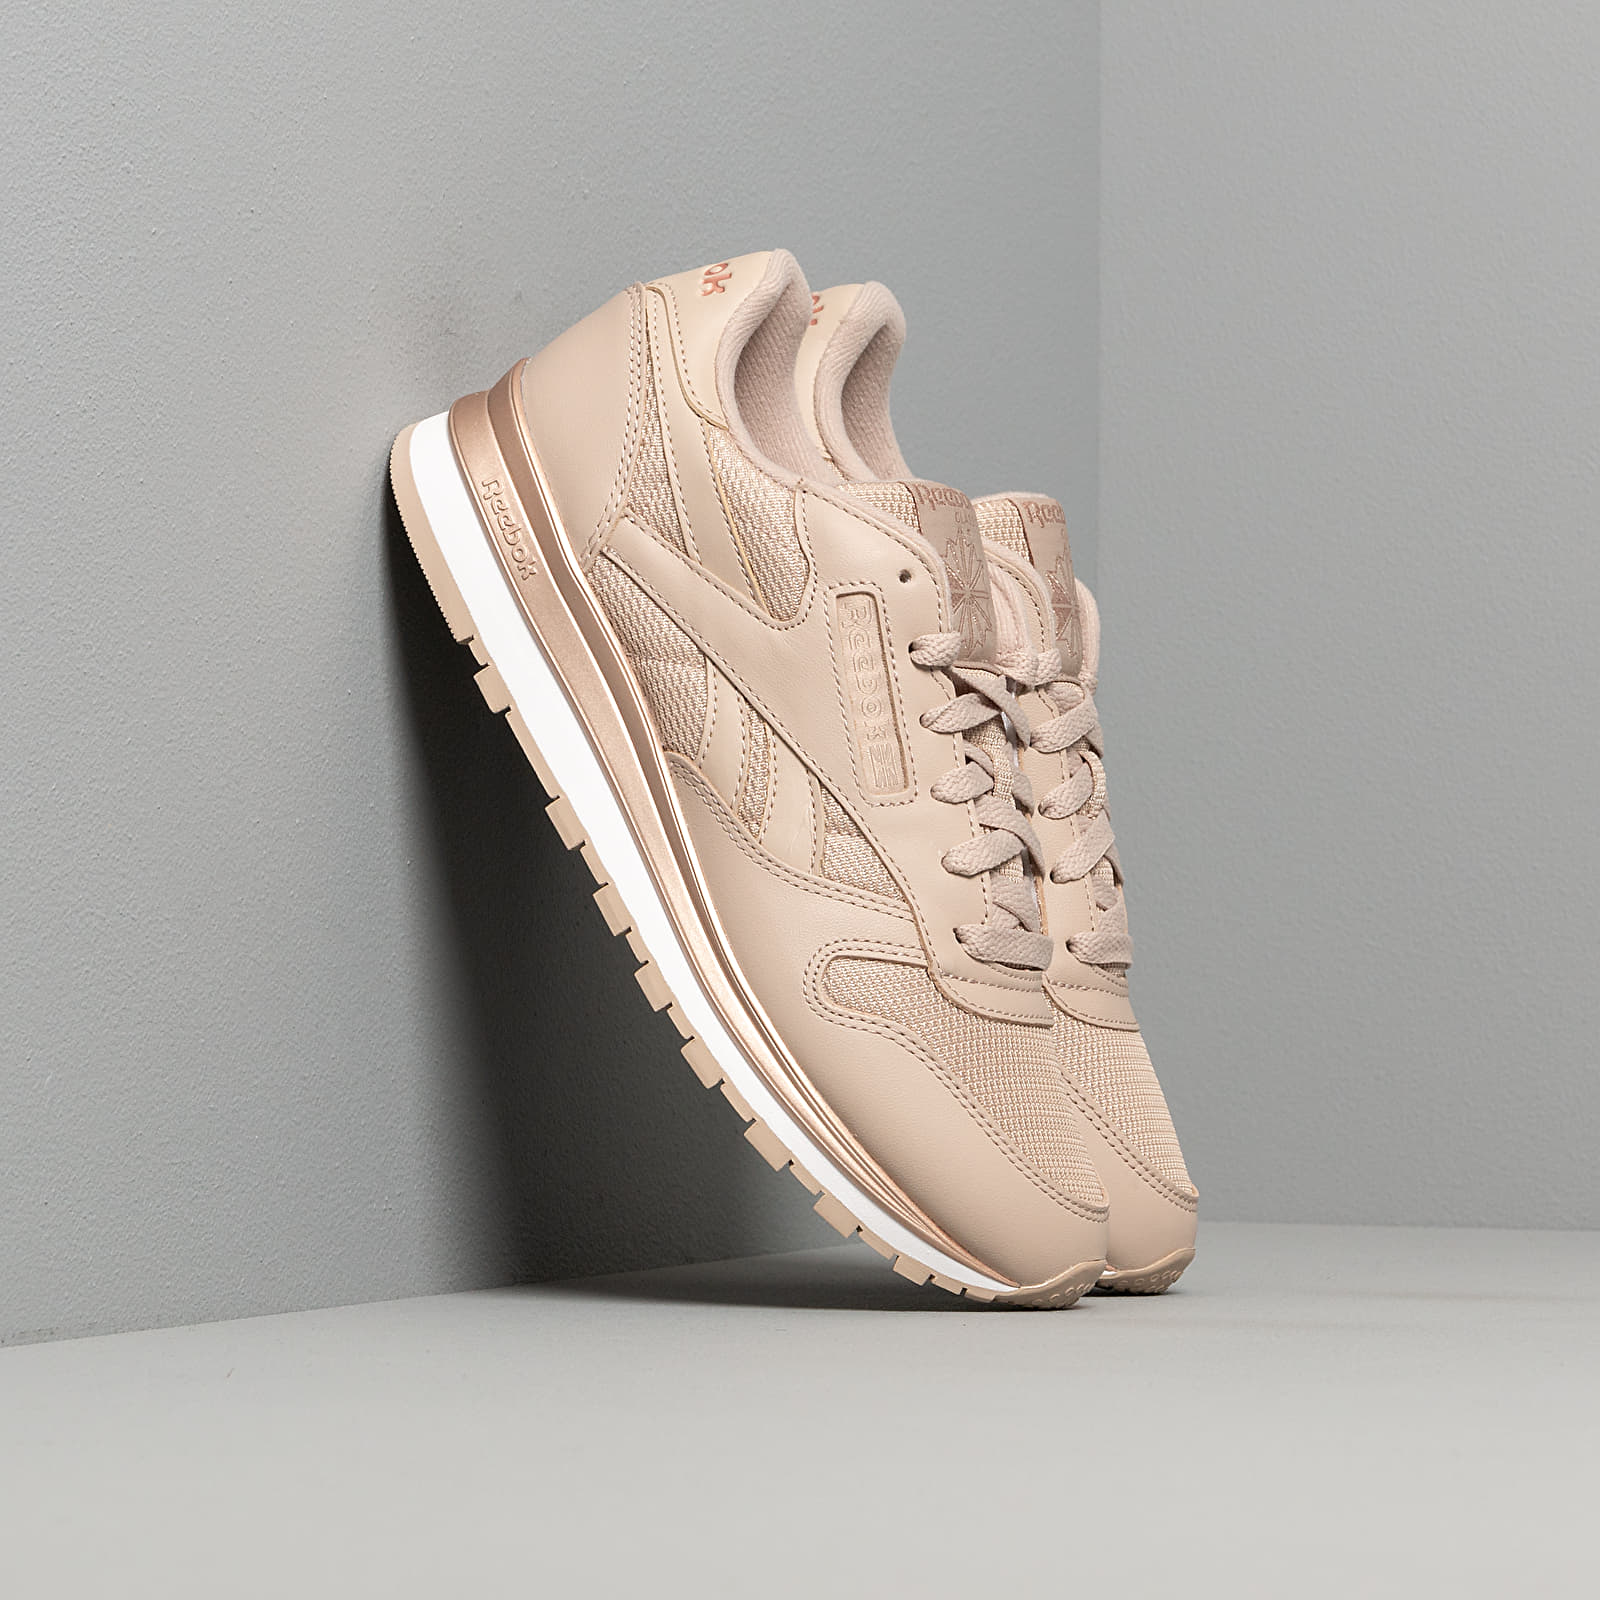 Chaussures et baskets femme Reebok Classic Leather Modern Beige/ Rose Gold/ White